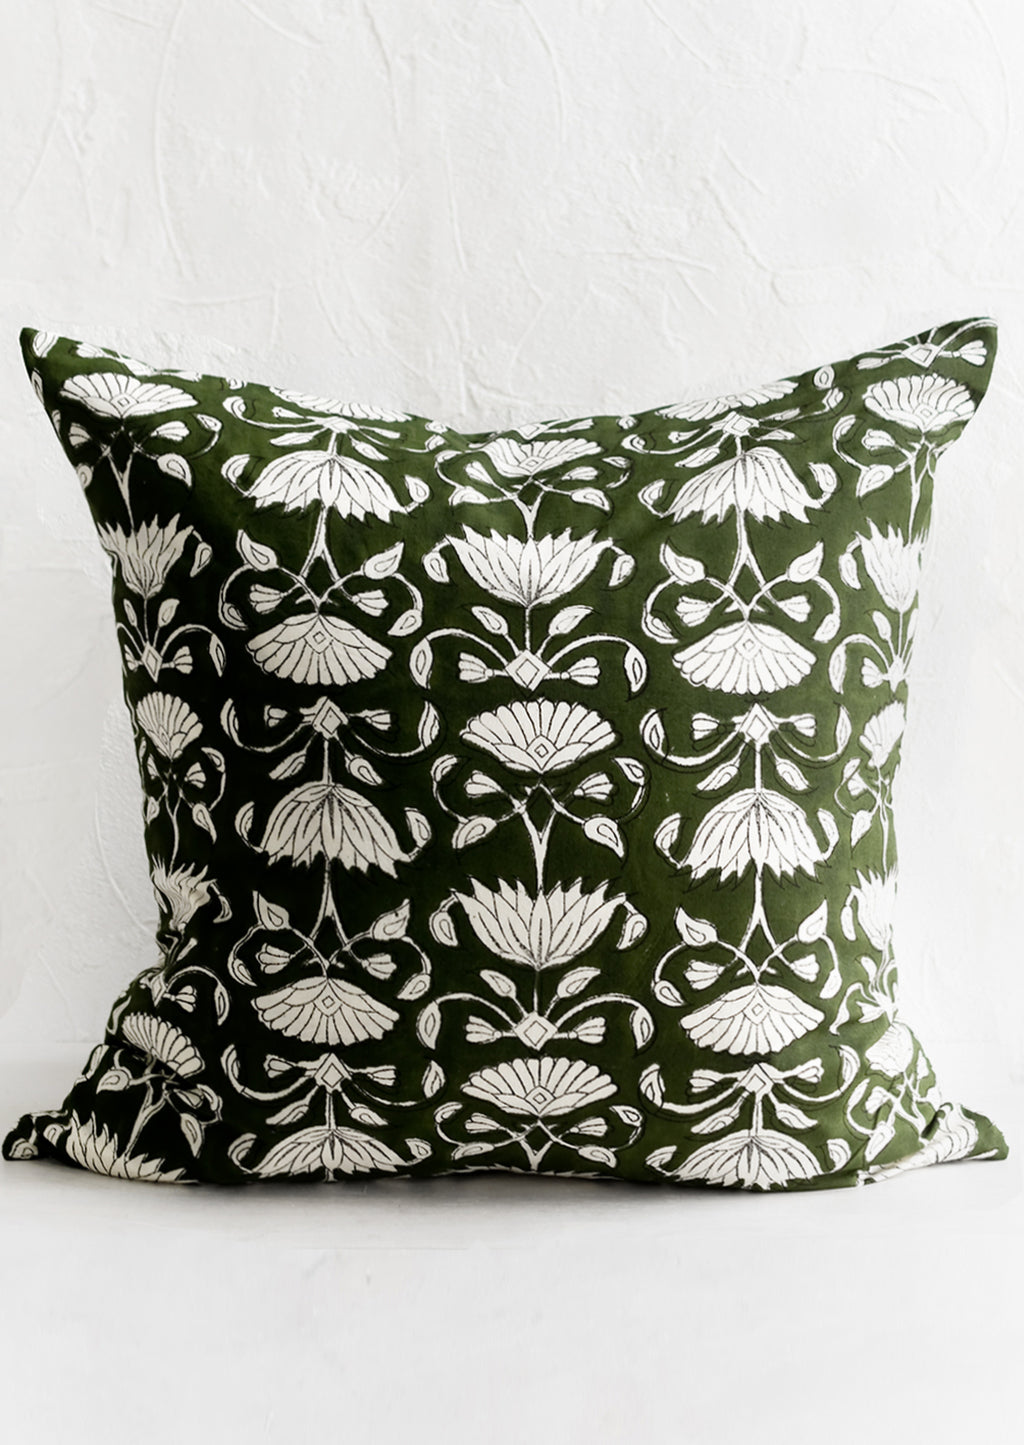 1: A block printed pillow in green and ivory floral motif.